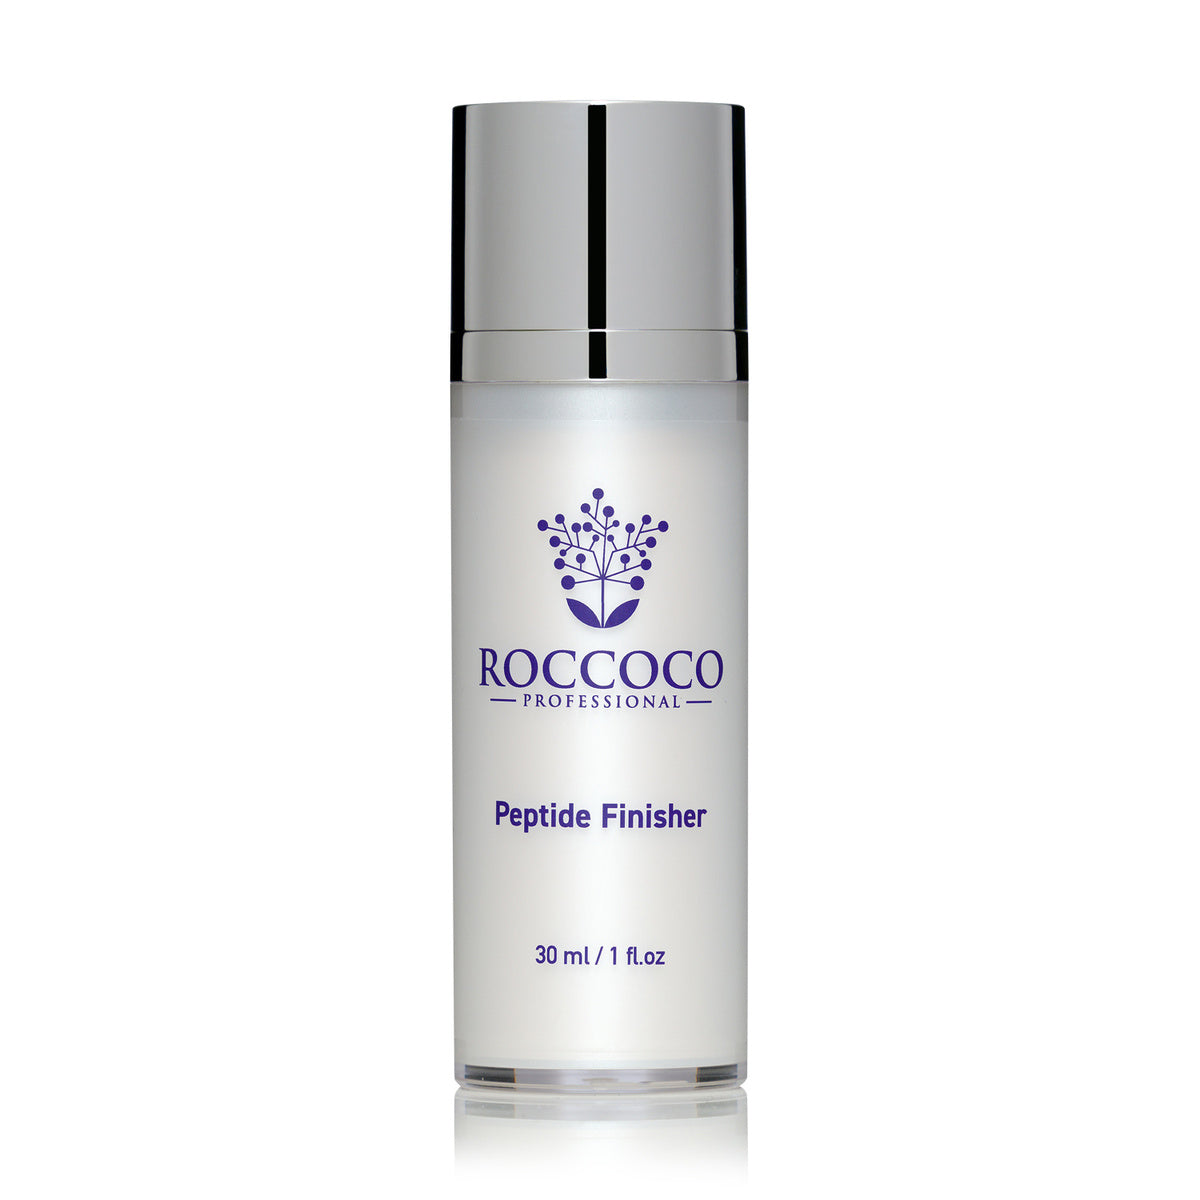 Peptide Finisher - Click to Buy!